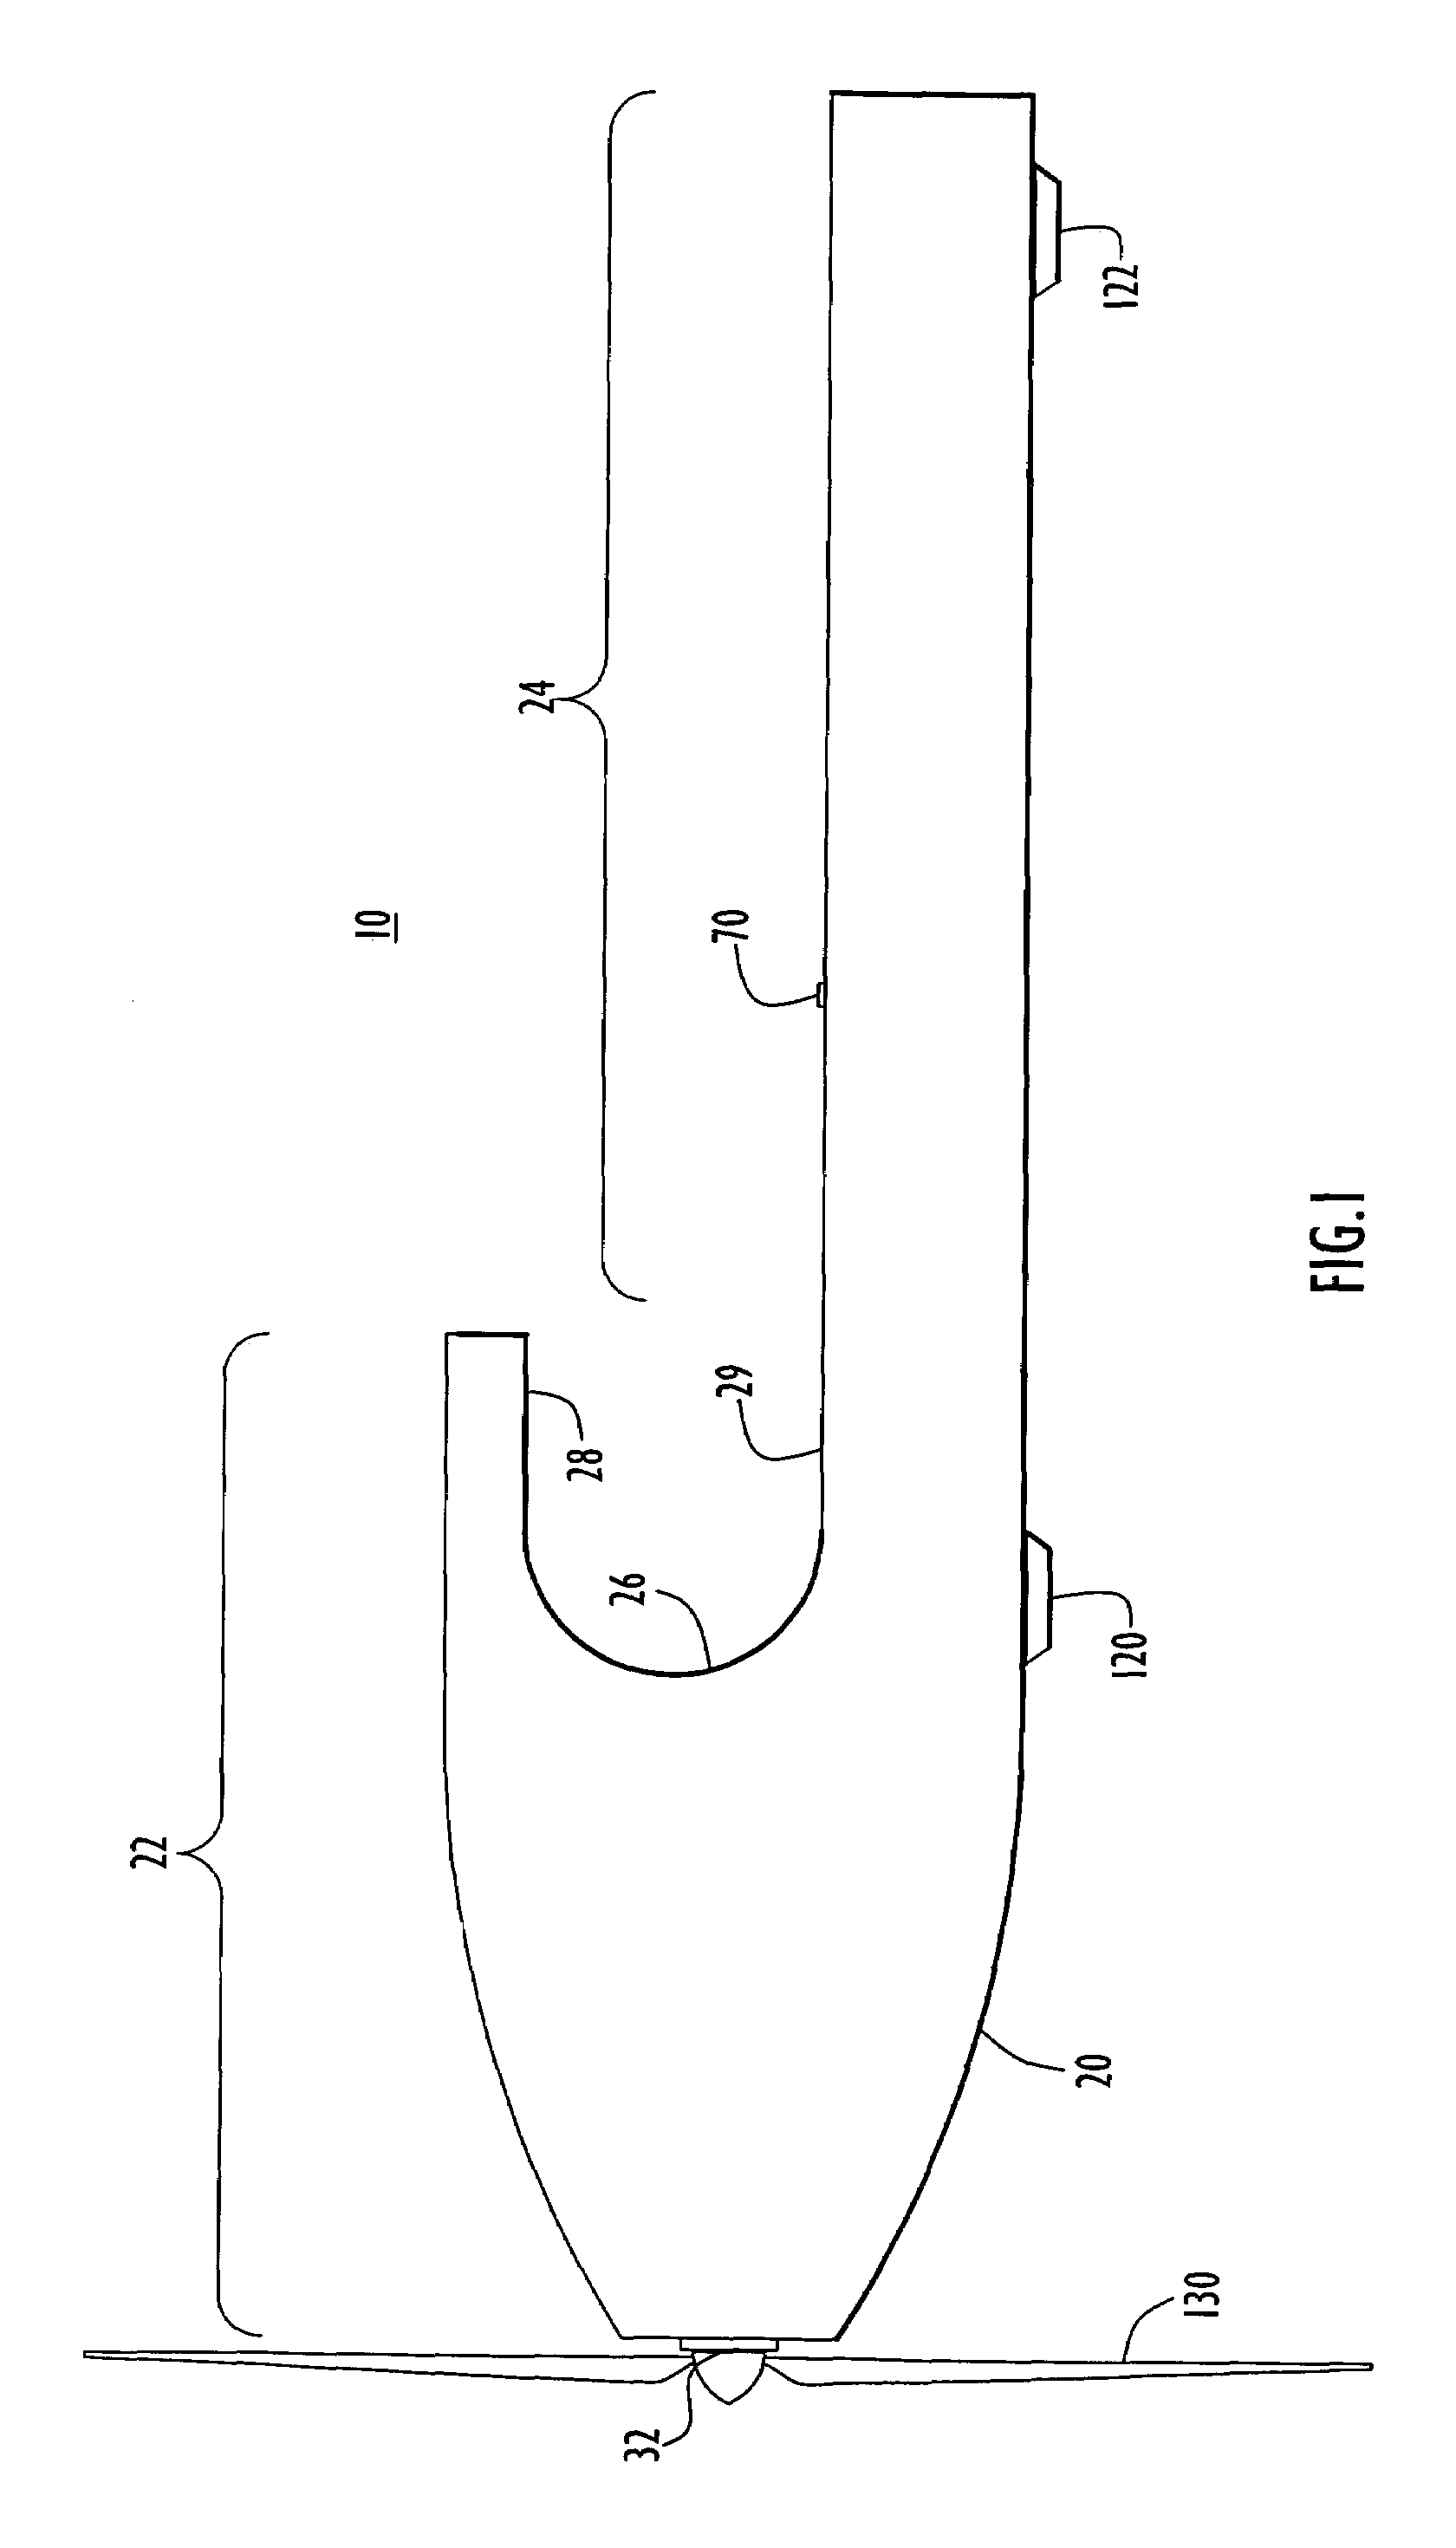 Electric motor assisted takeoff device for an air vehicle